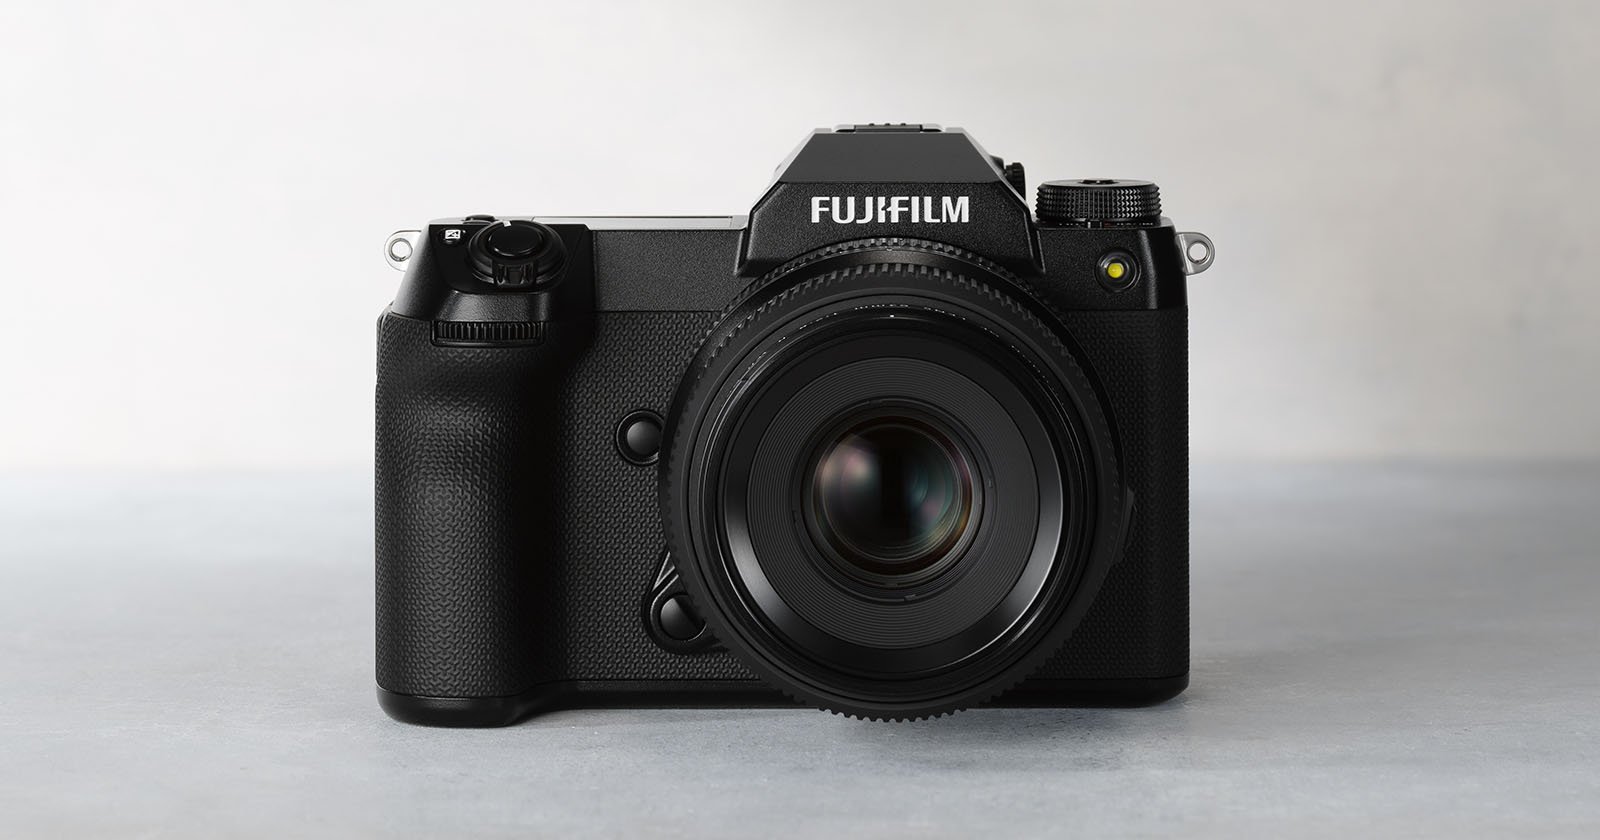 Front view of a black Fujifilm professional digital camera placed on a light gray surface. The camera features a prominent lens and detailed buttons on the left side of its body. The brand name Fujifilm is clearly visible on the top of the camera.